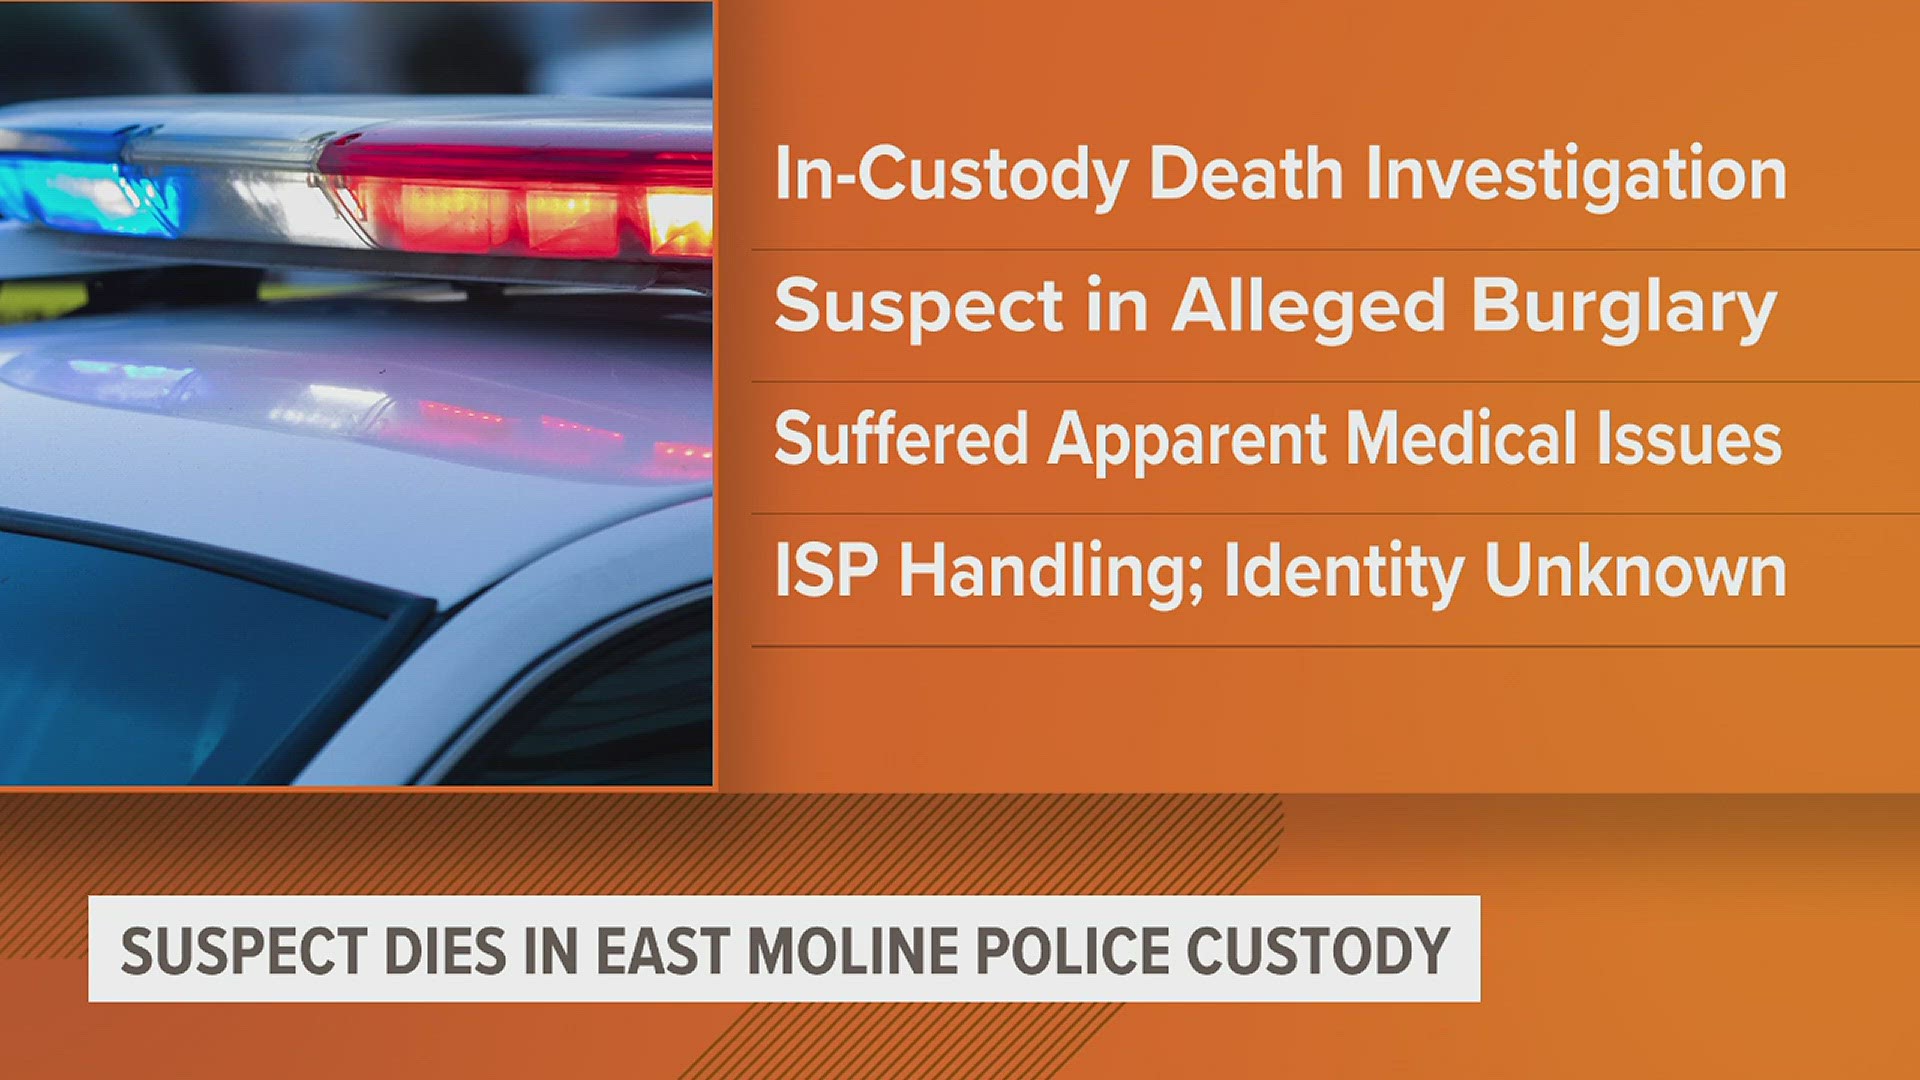 Early Wednesday morning, East Moline police made an arrest after an alleged burglary, but later this morning, officials said the suspect died.